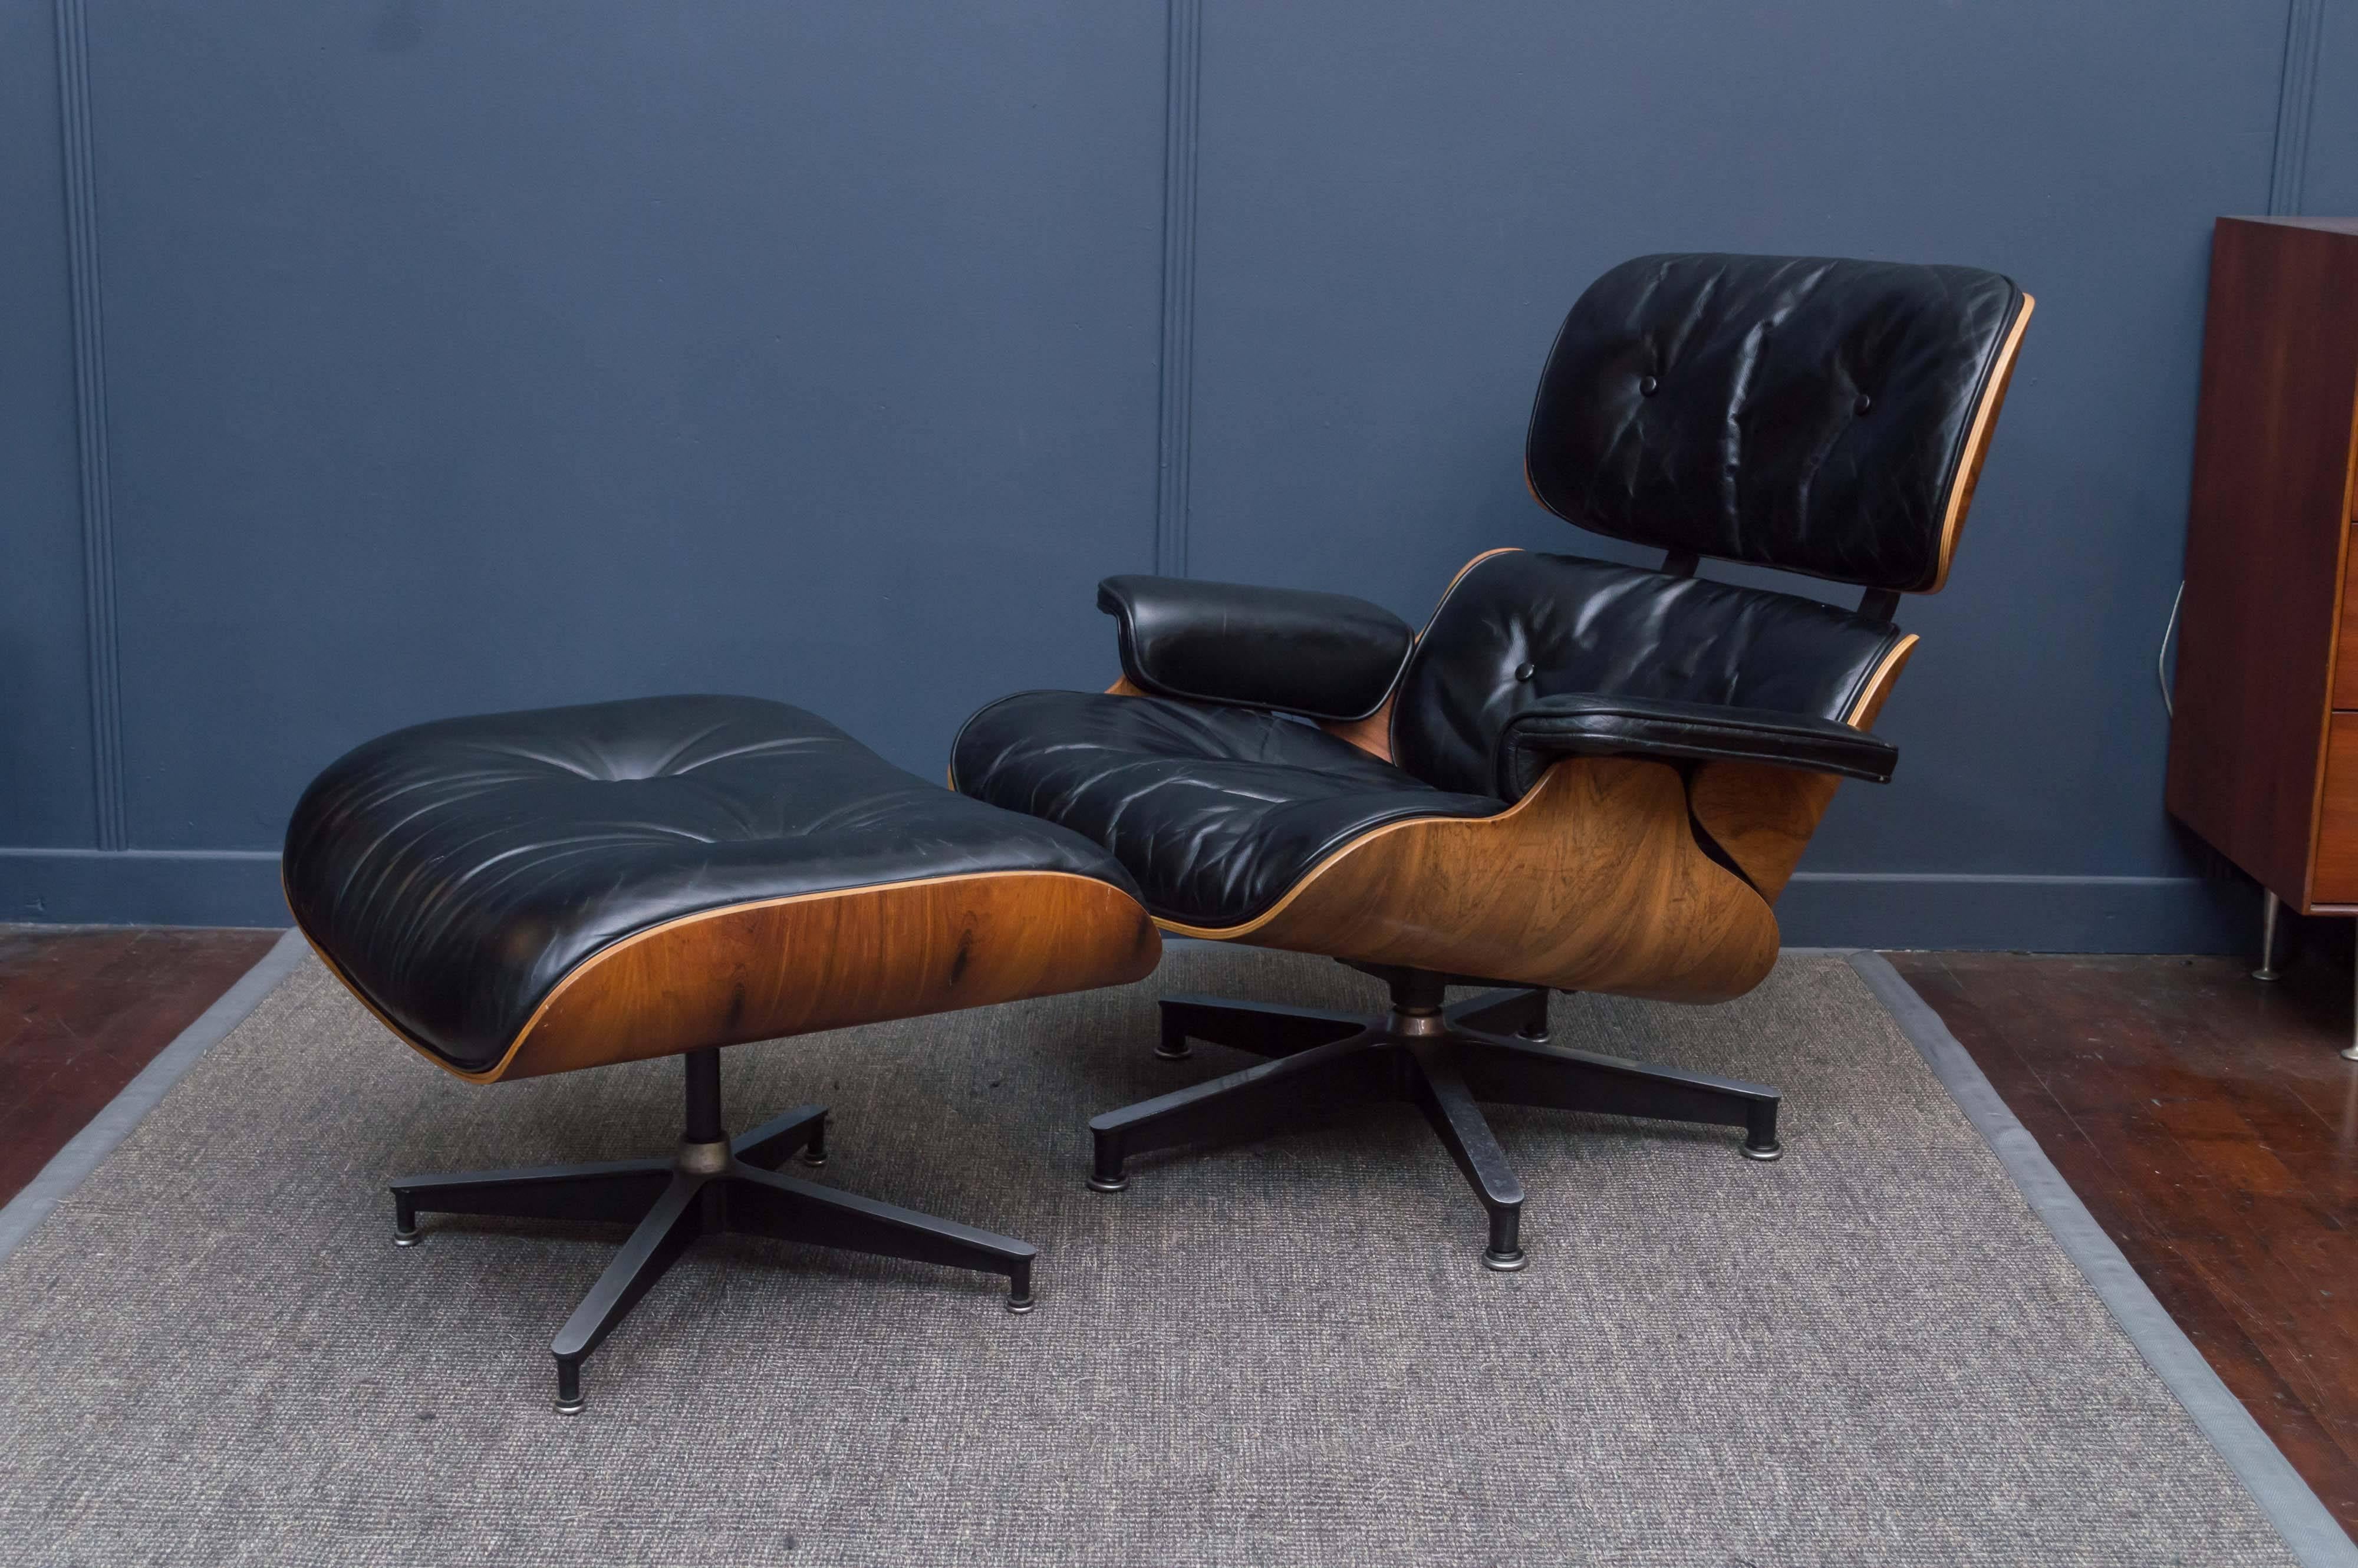 Charles and Ray Eames design 670, 671 rosewood lounge chair and ottoman for Herman Miller. In very good vintage condition, rosewood in excellent condition with age appropriate wear to the leather.
Stamped, labeled, circa 1970.